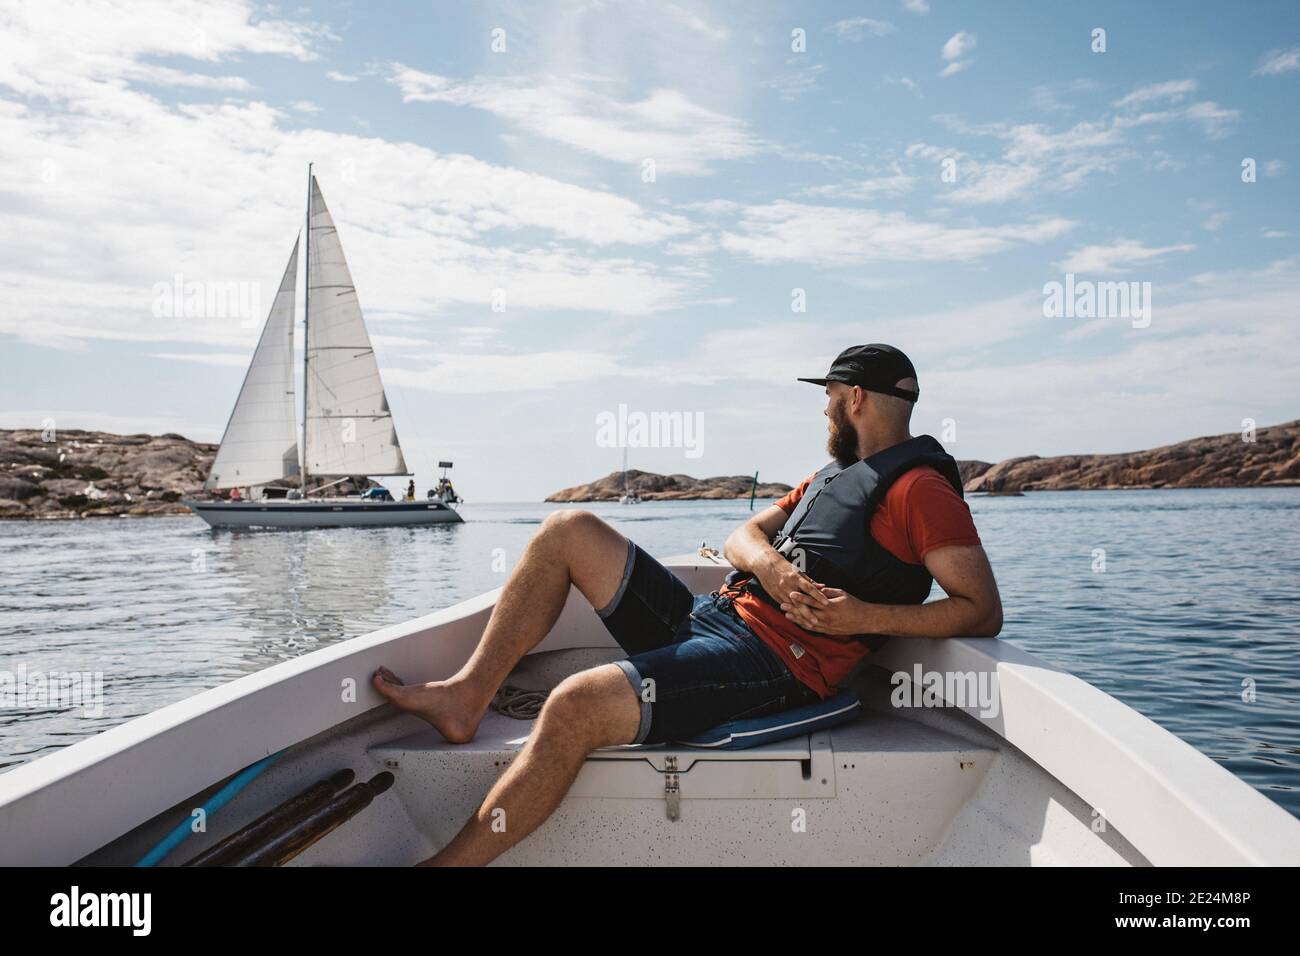 Man relaxing on boat Banque D'Images